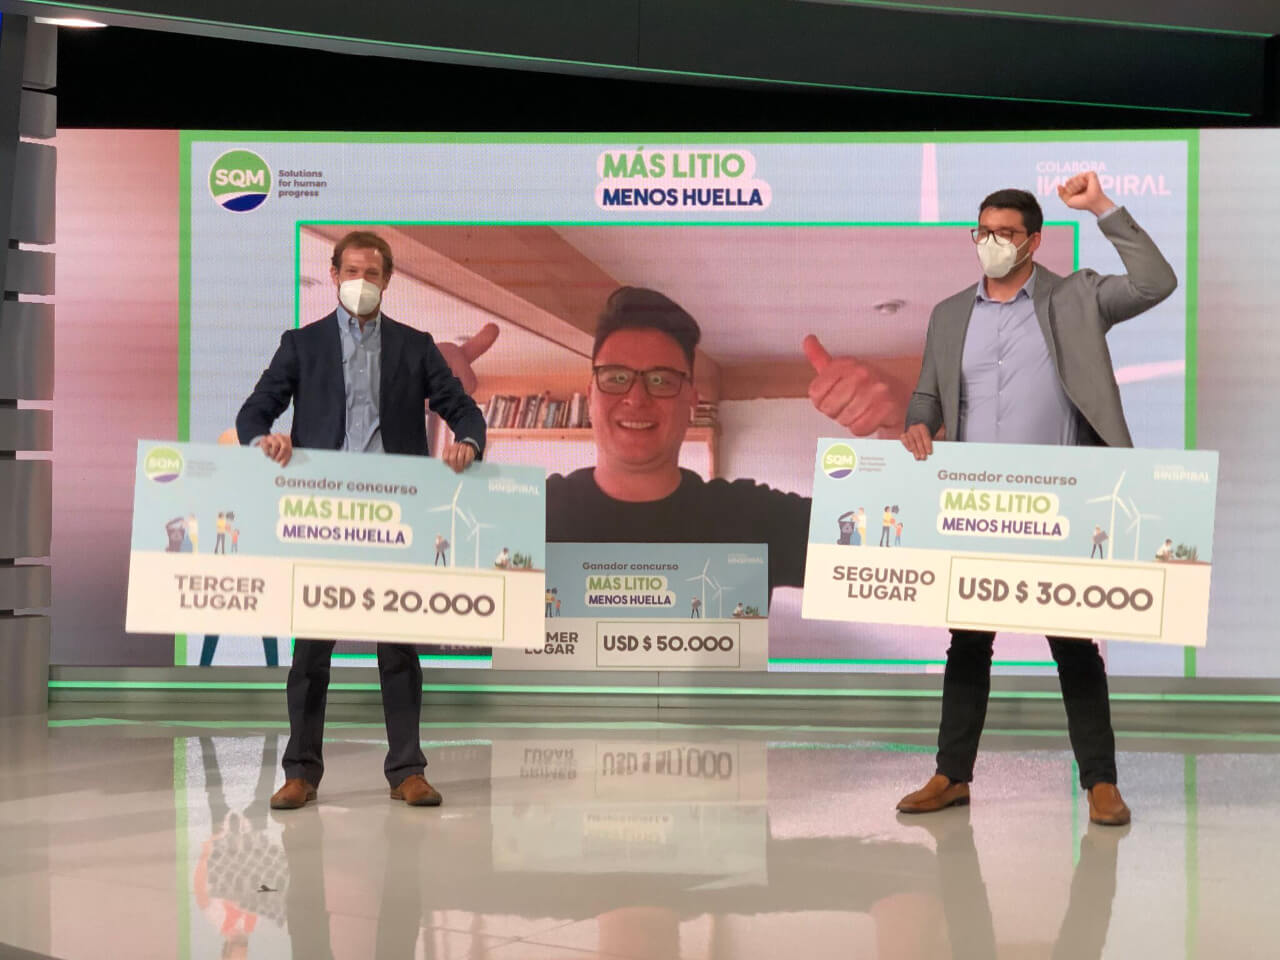 The two winners of the More Lithium, Less Huella contest are seen in the image